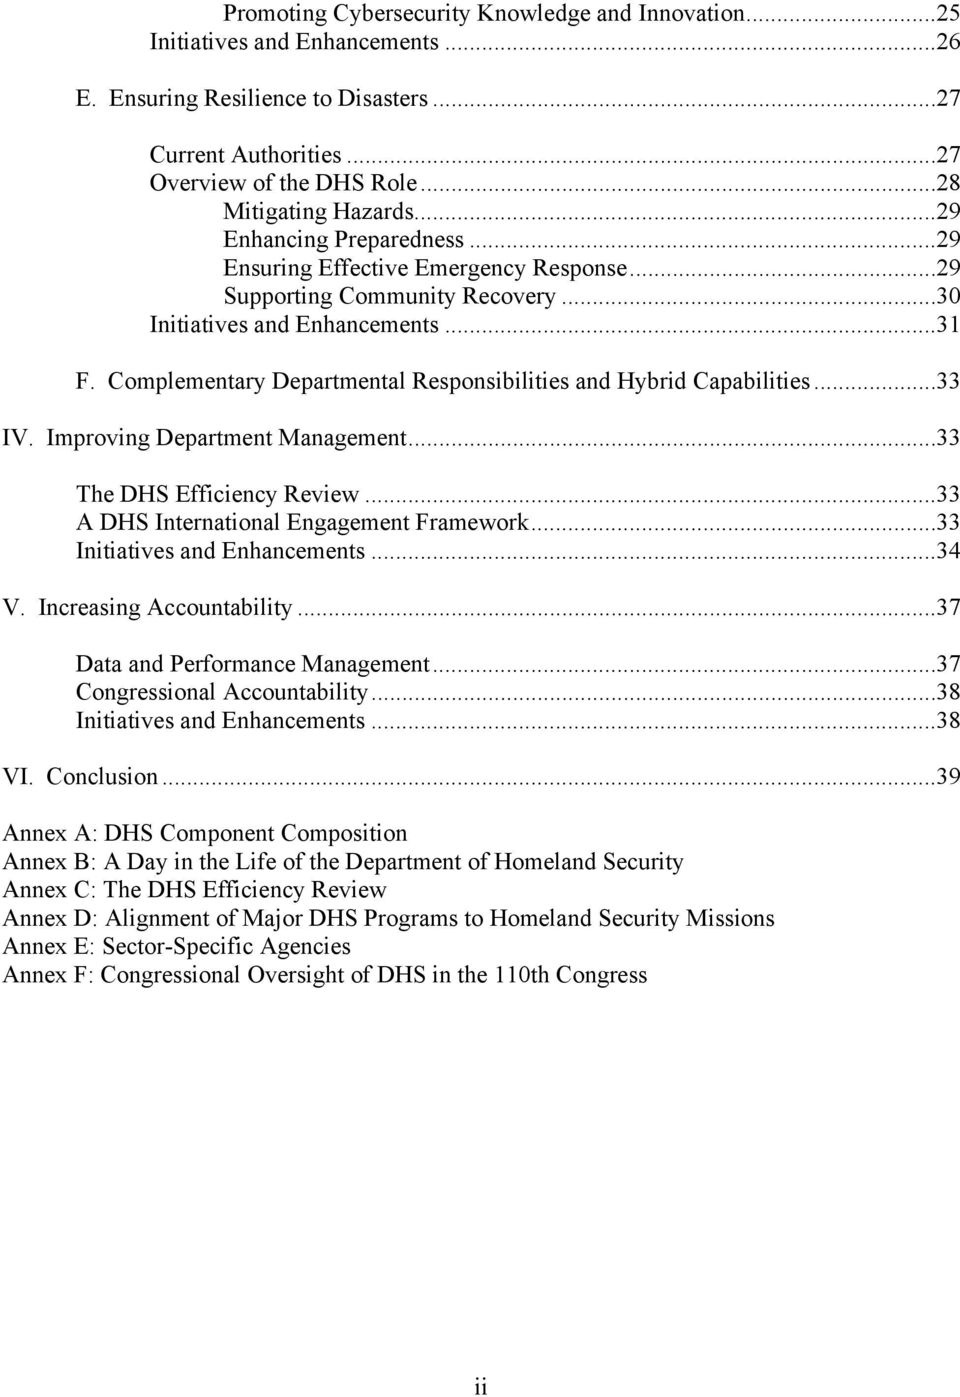 Complementary Departmental Responsibilities and Hybrid Capabilities...33 IV. Improving Department Management...33 The DHS Efficiency Review...33 A DHS International Engagement Framework.